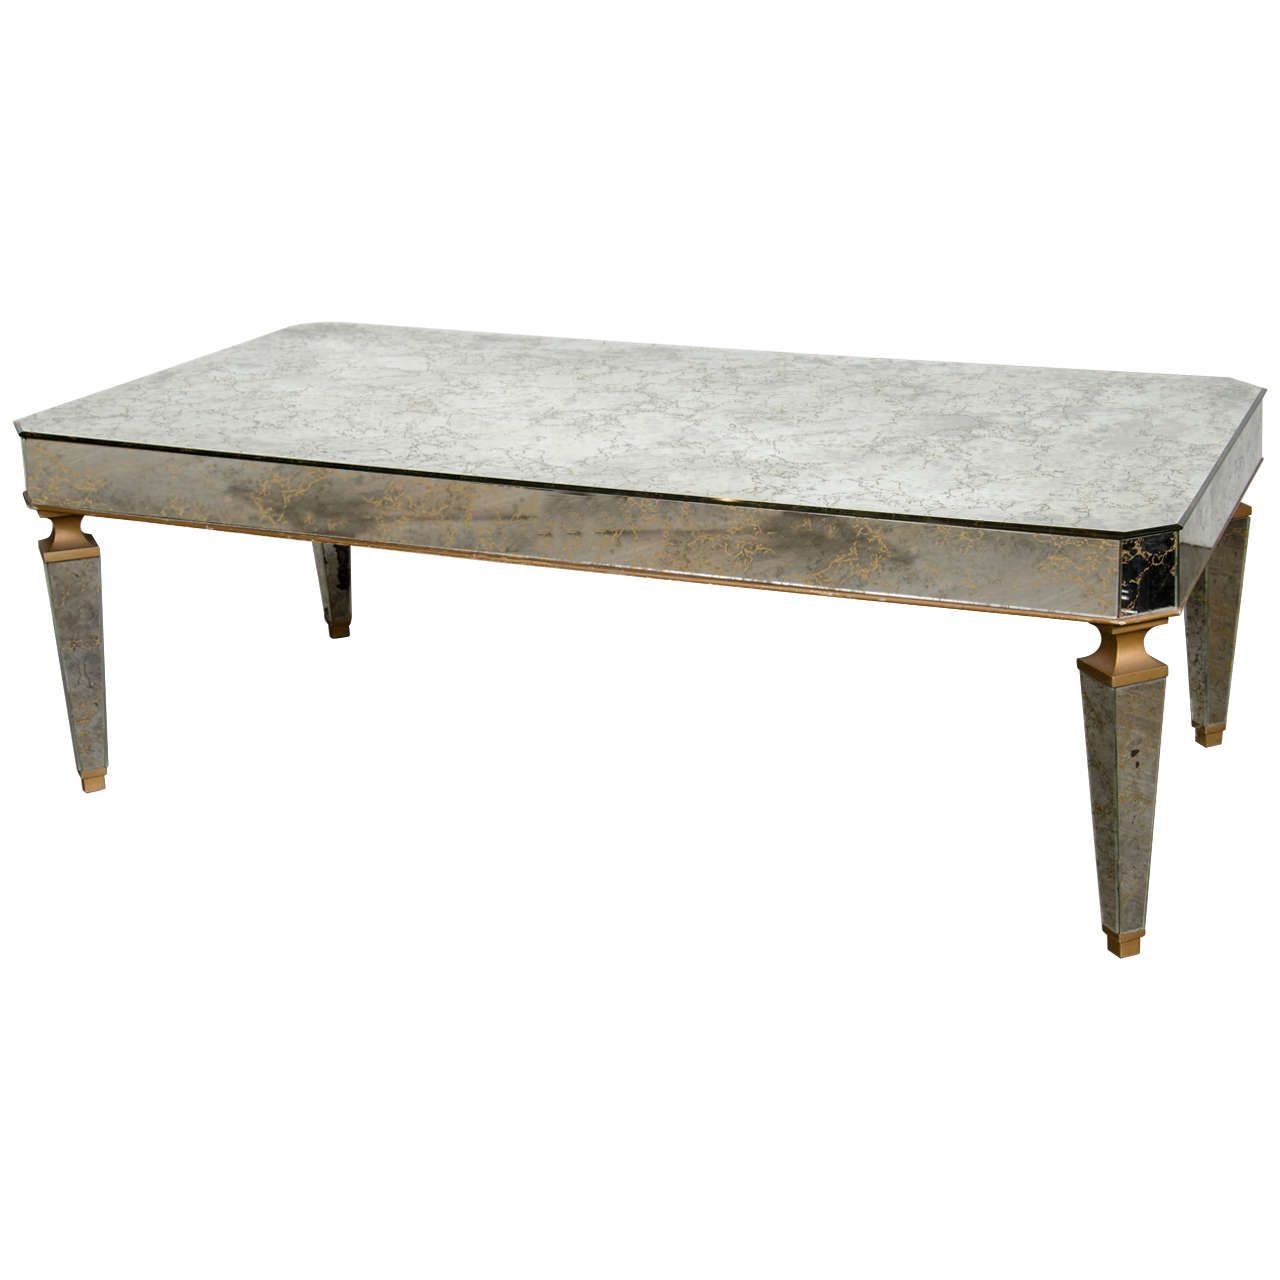 Elegant Mirrored And Gilt Cocktail Table In The Manner Of Pertaining To Mirrored Cocktail Tables (View 12 of 15)